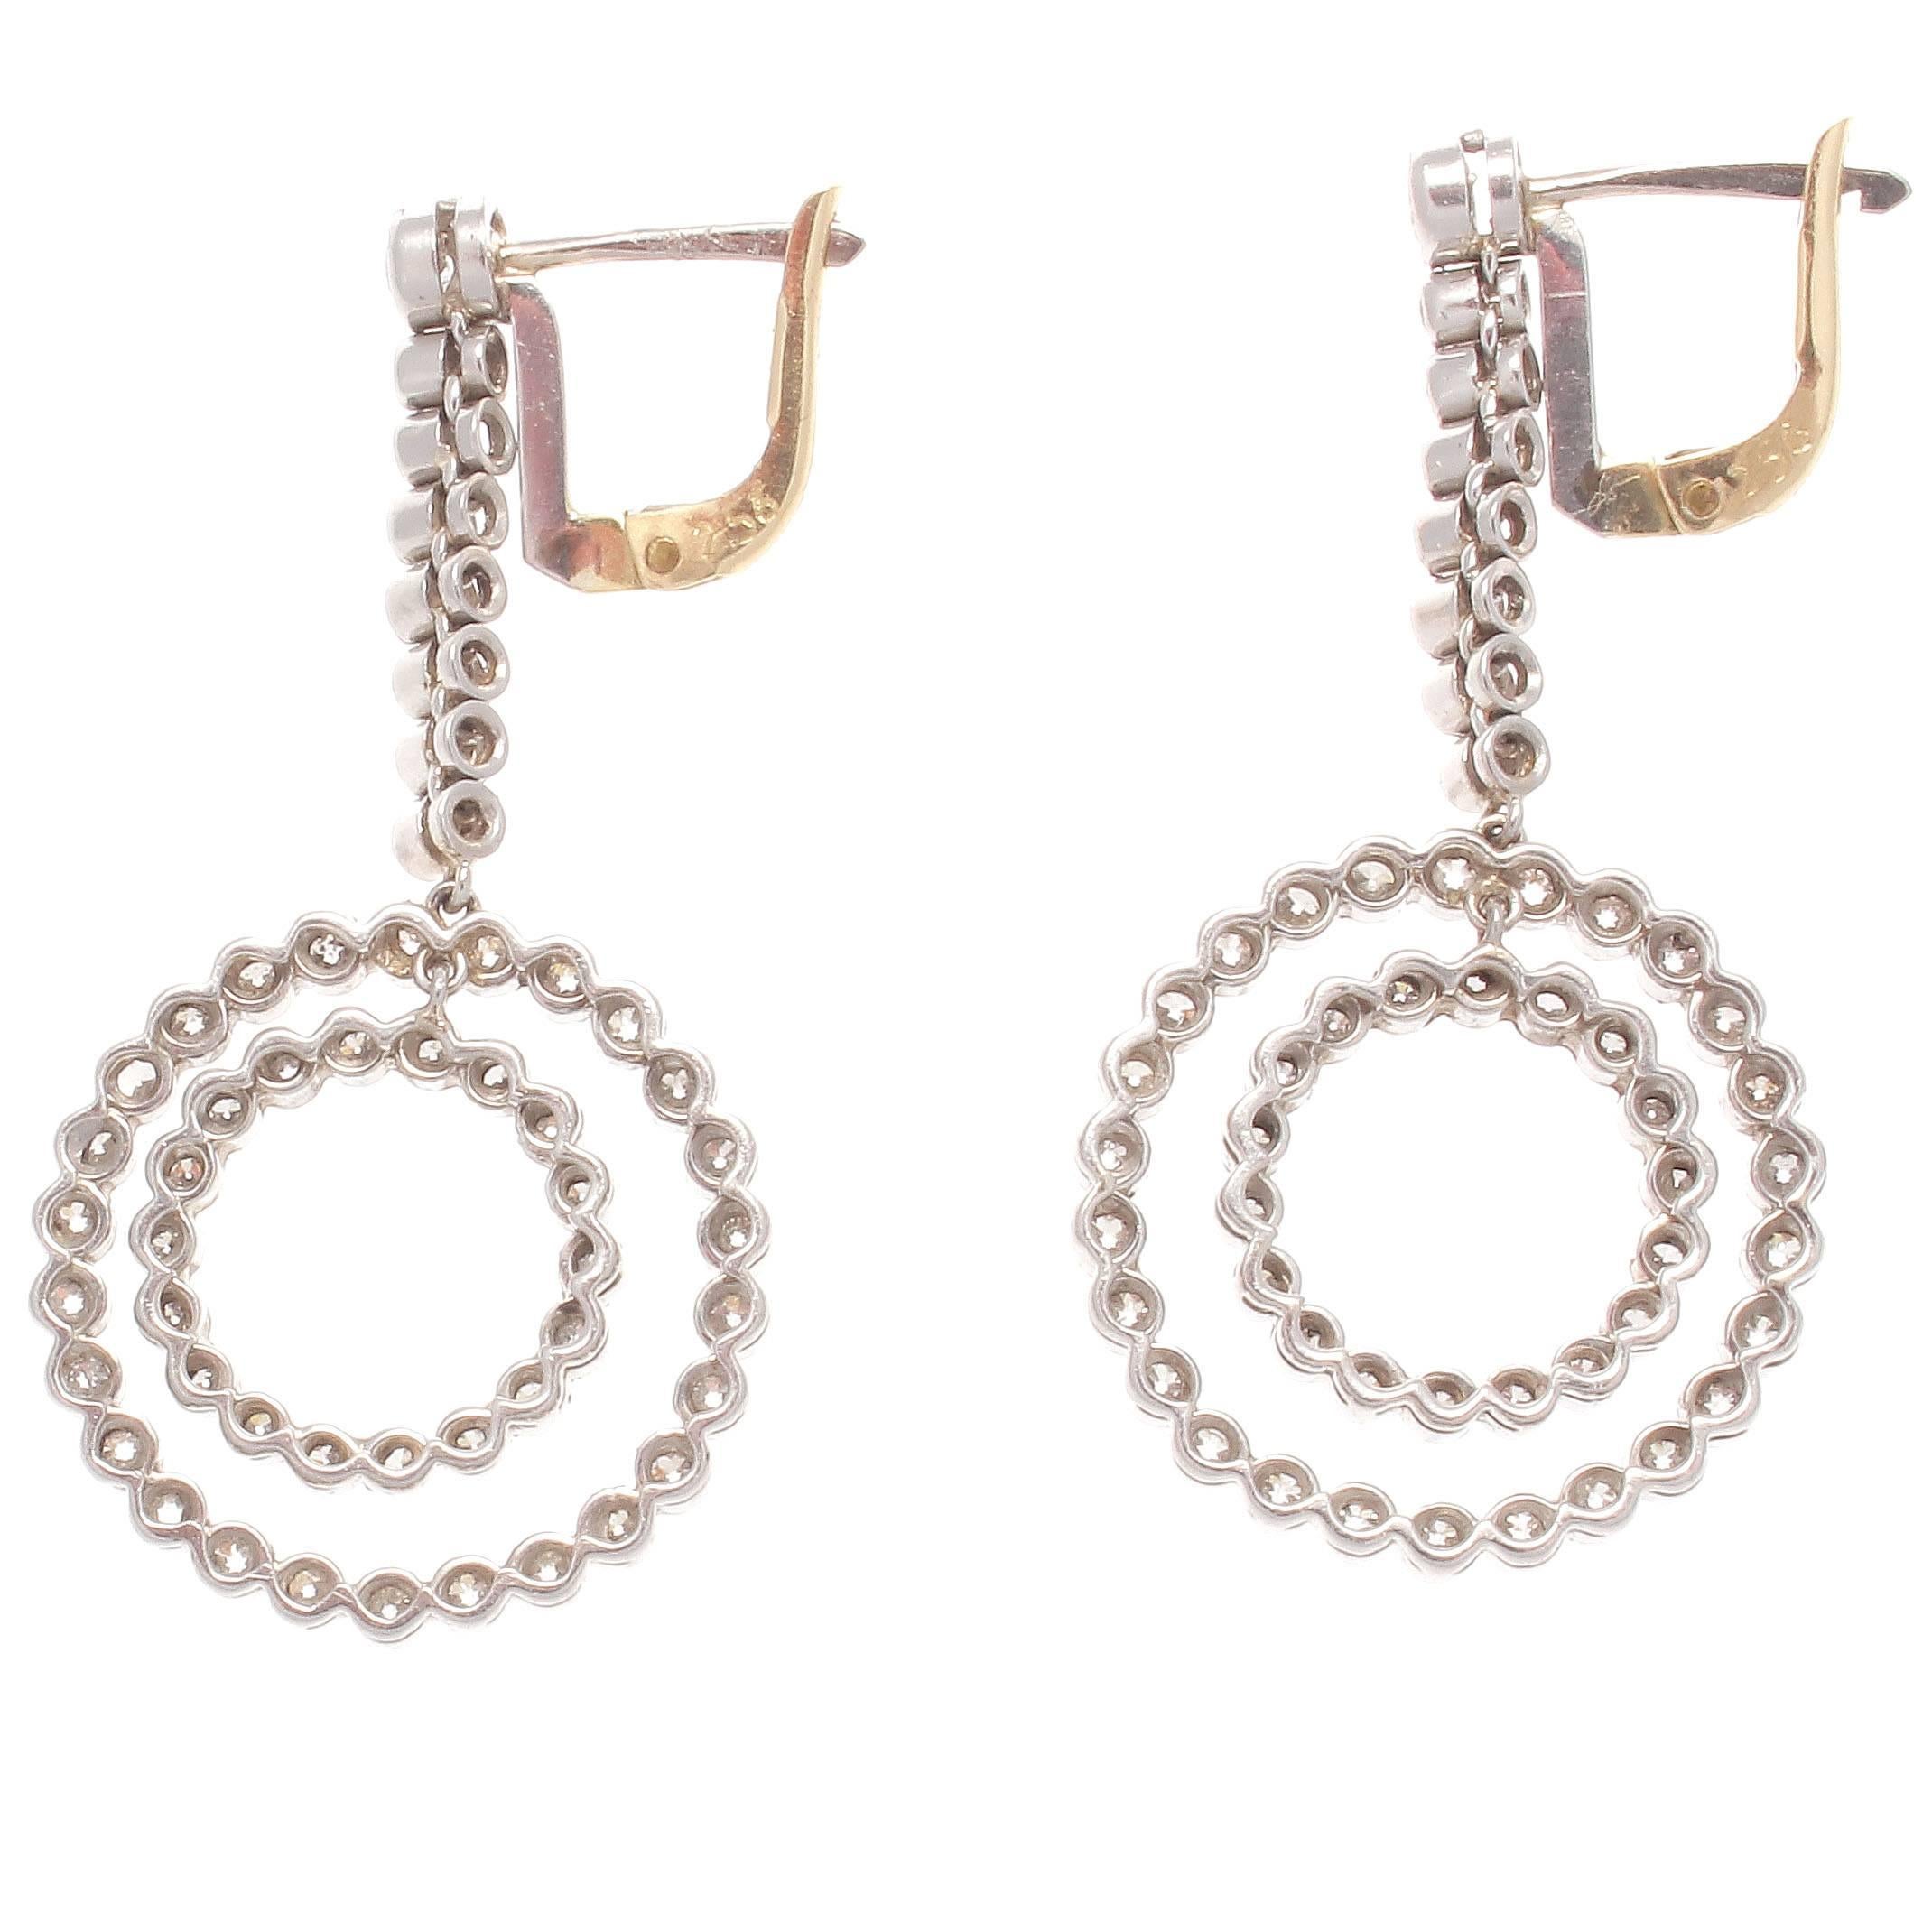 The double circle diamond earrings are in the style of one of the most creative eras of jewelry, Art Deco. Designed with 104 diamonds weighing approximately 2 carats that are H-I color, VS clarity. Hand crafted in platinum.